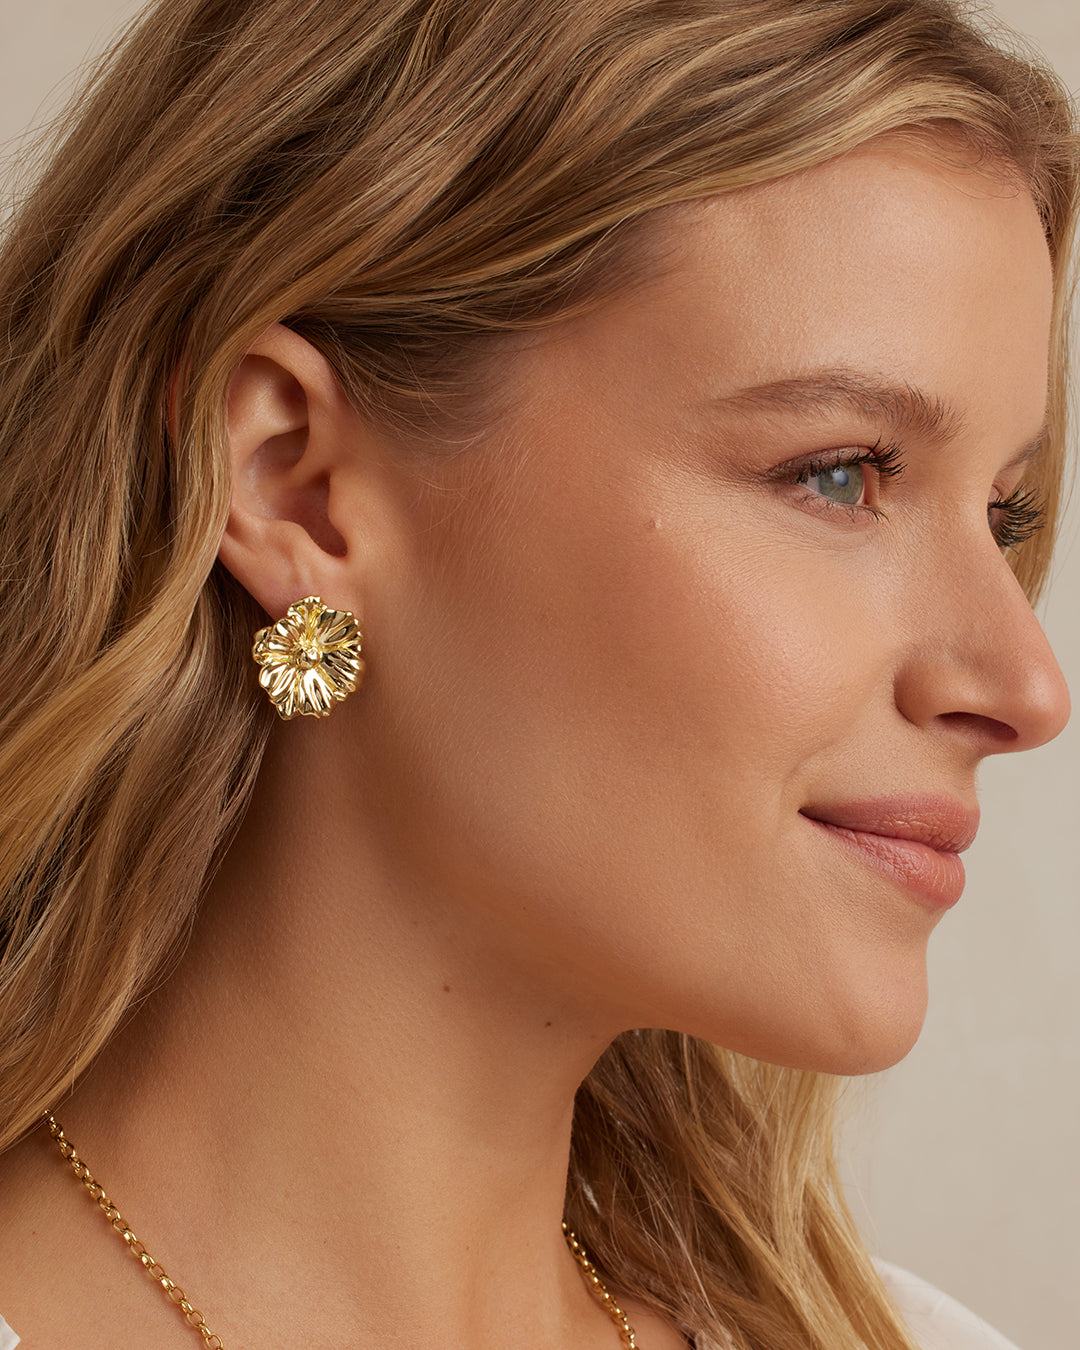 Camila Studs || option::Gold Plated